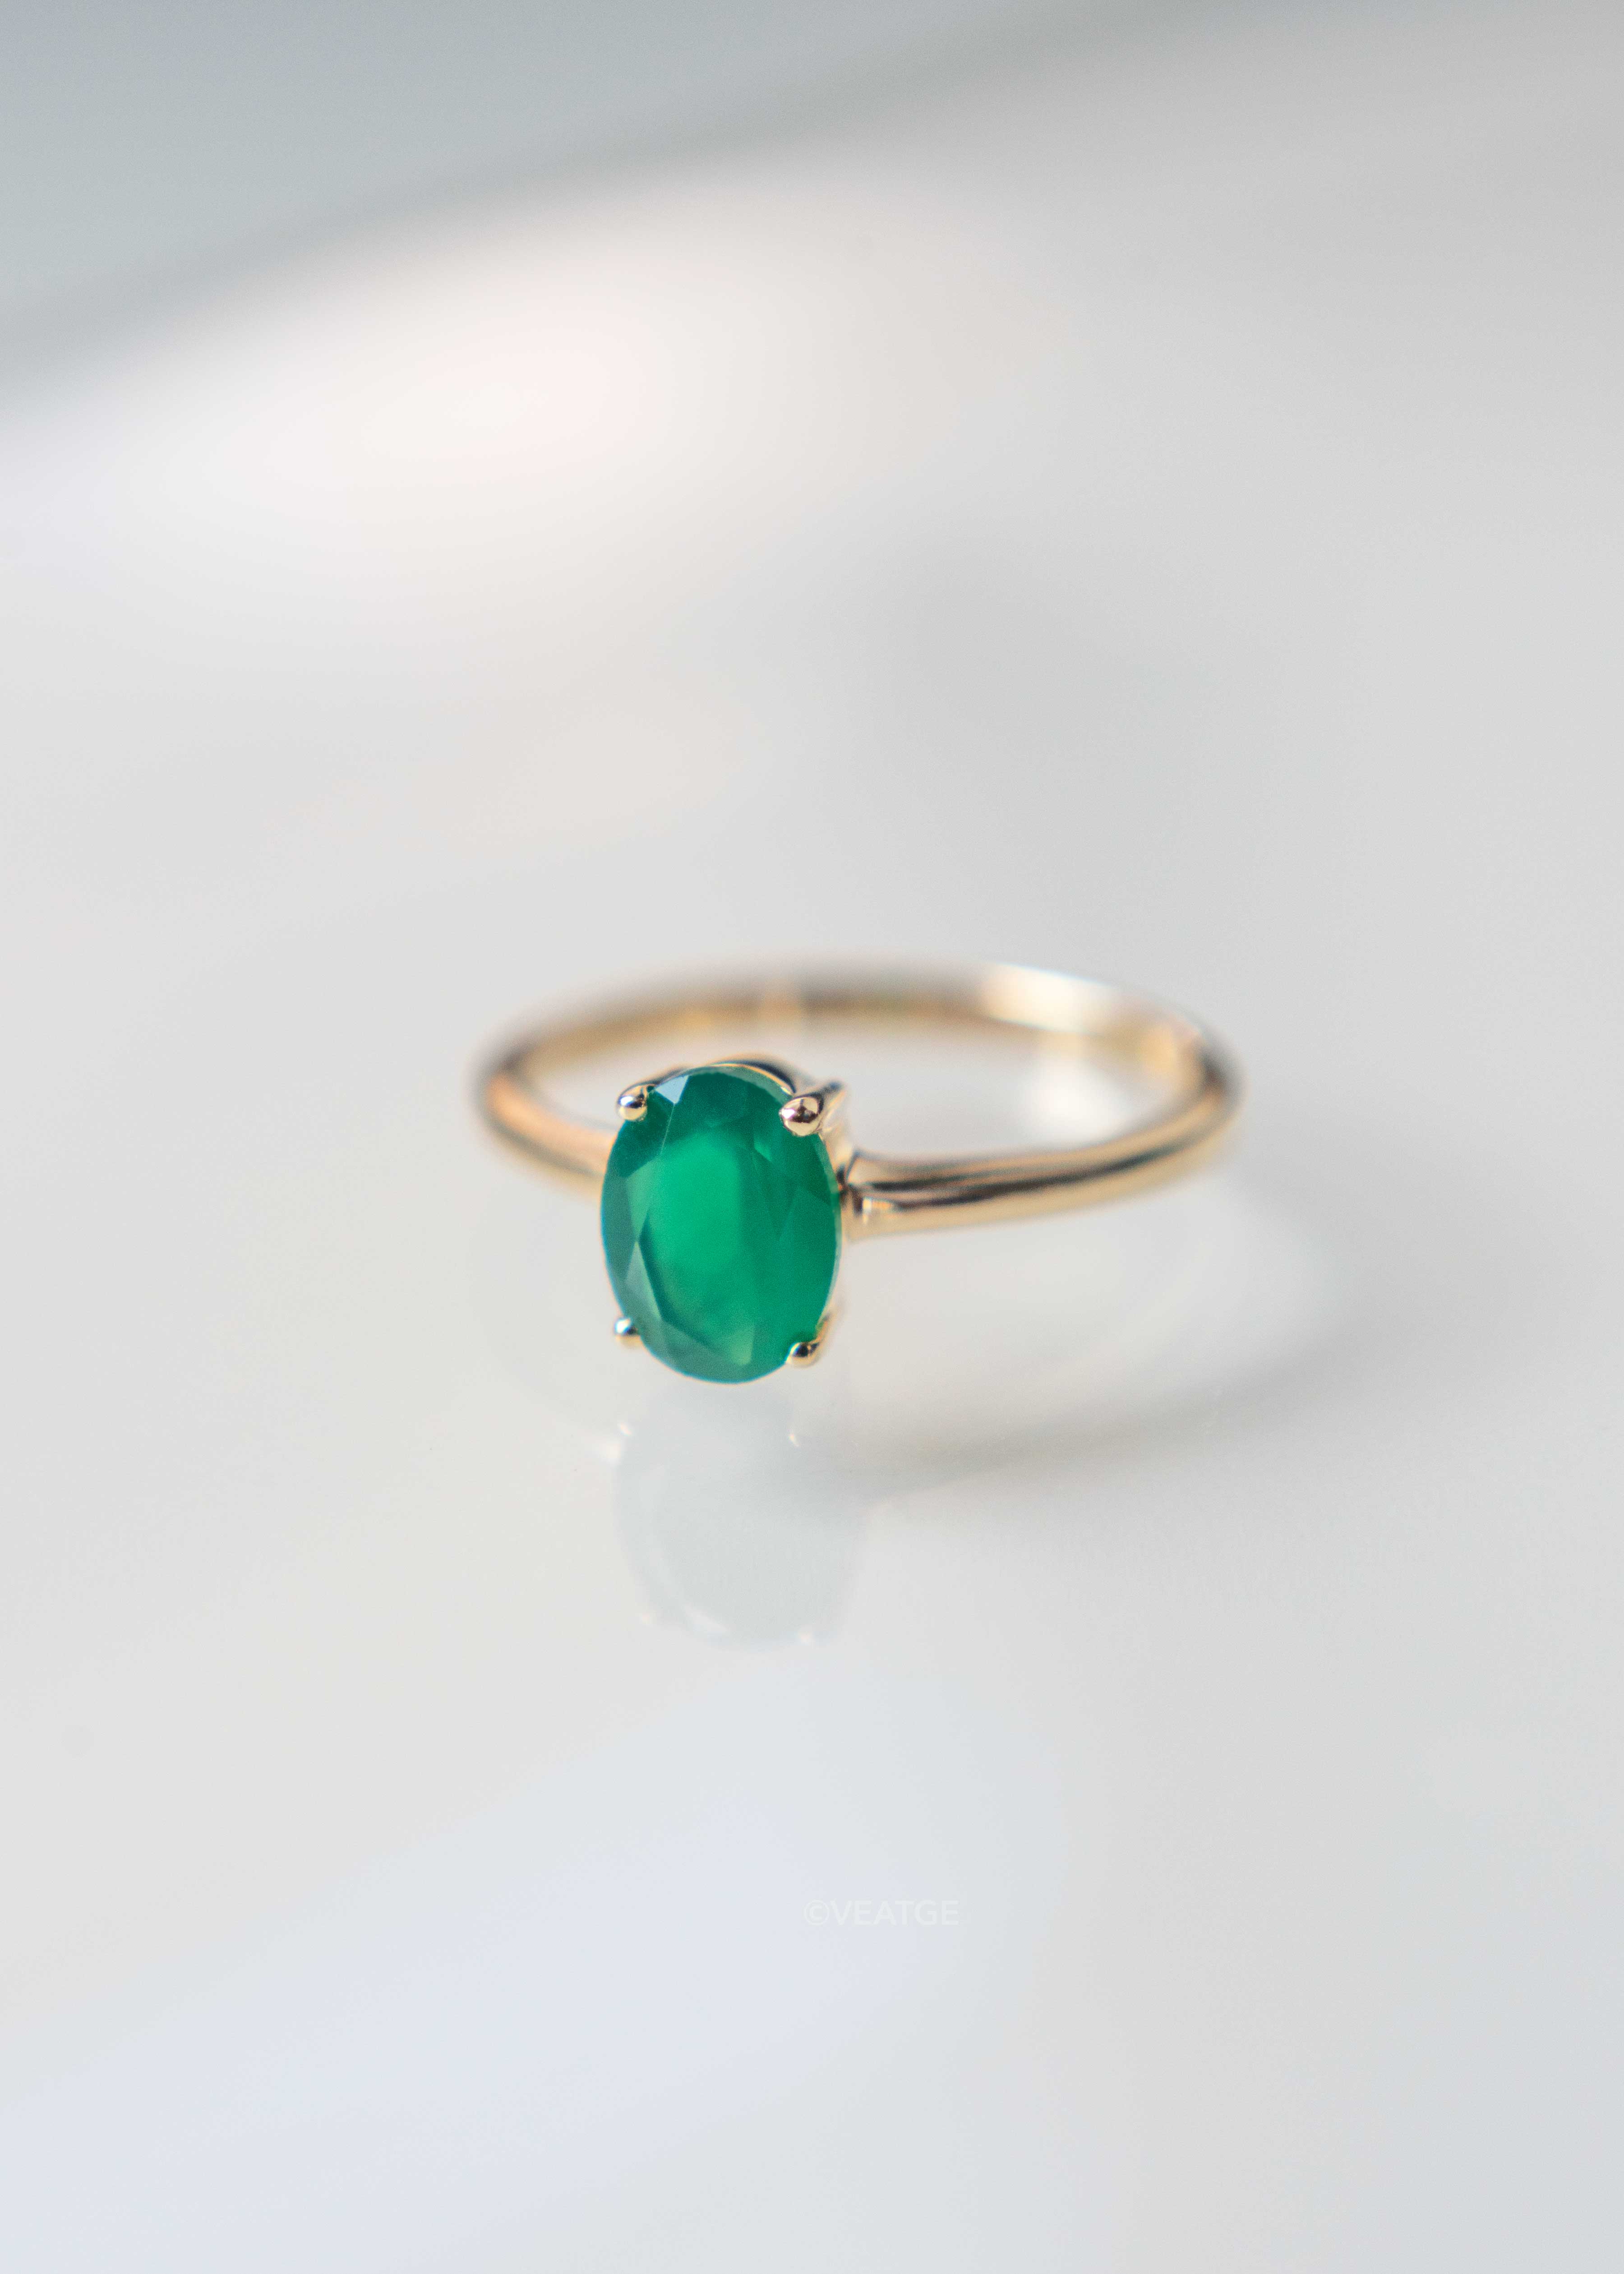 christmas gifts for hersignature oval green onyx ring in 14k gold vermeil